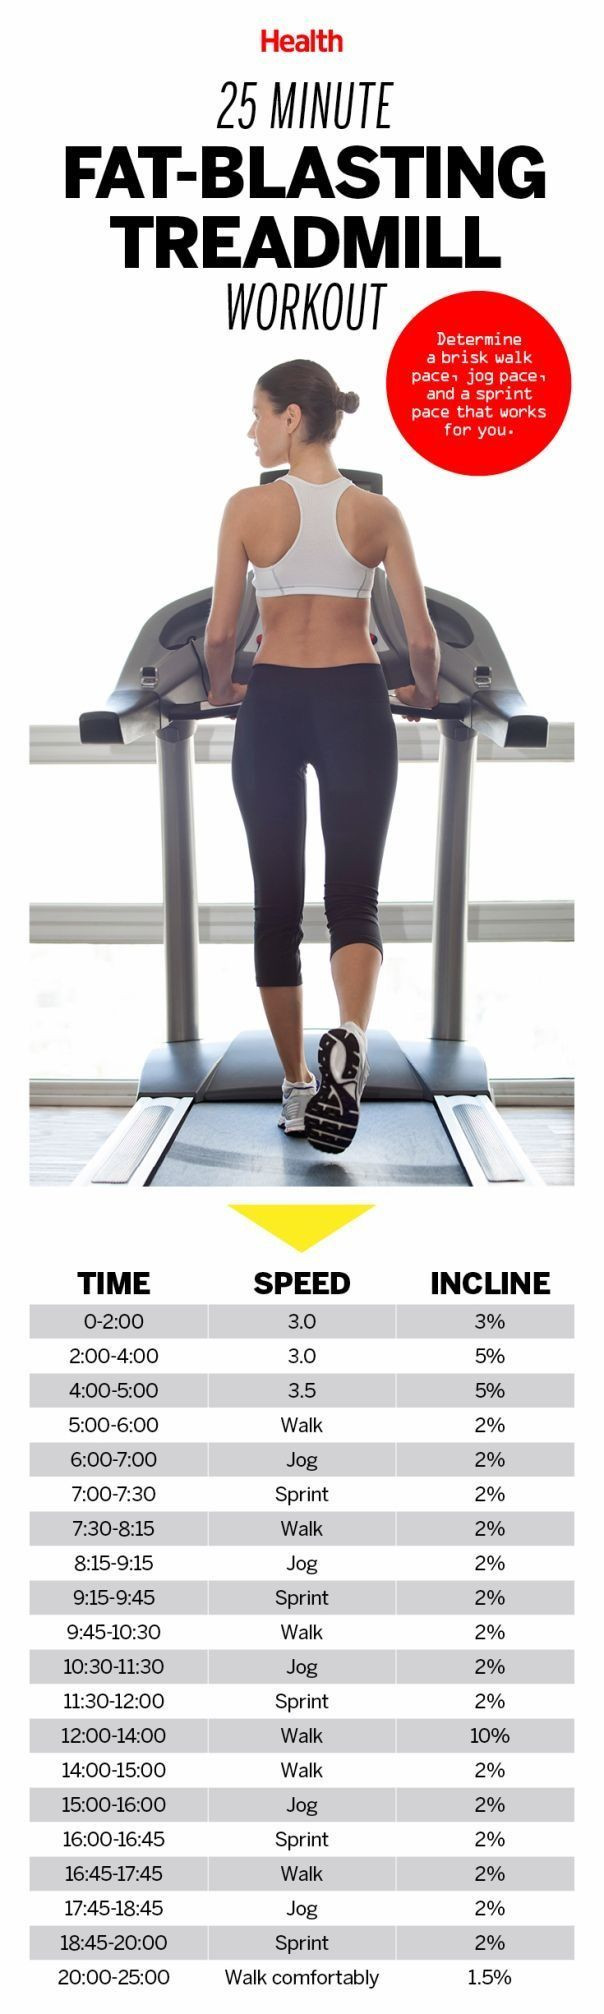 Fat Burning Workout At The Gym Weights
 A Fat Burning Treadmill Workout That s Actually Fun